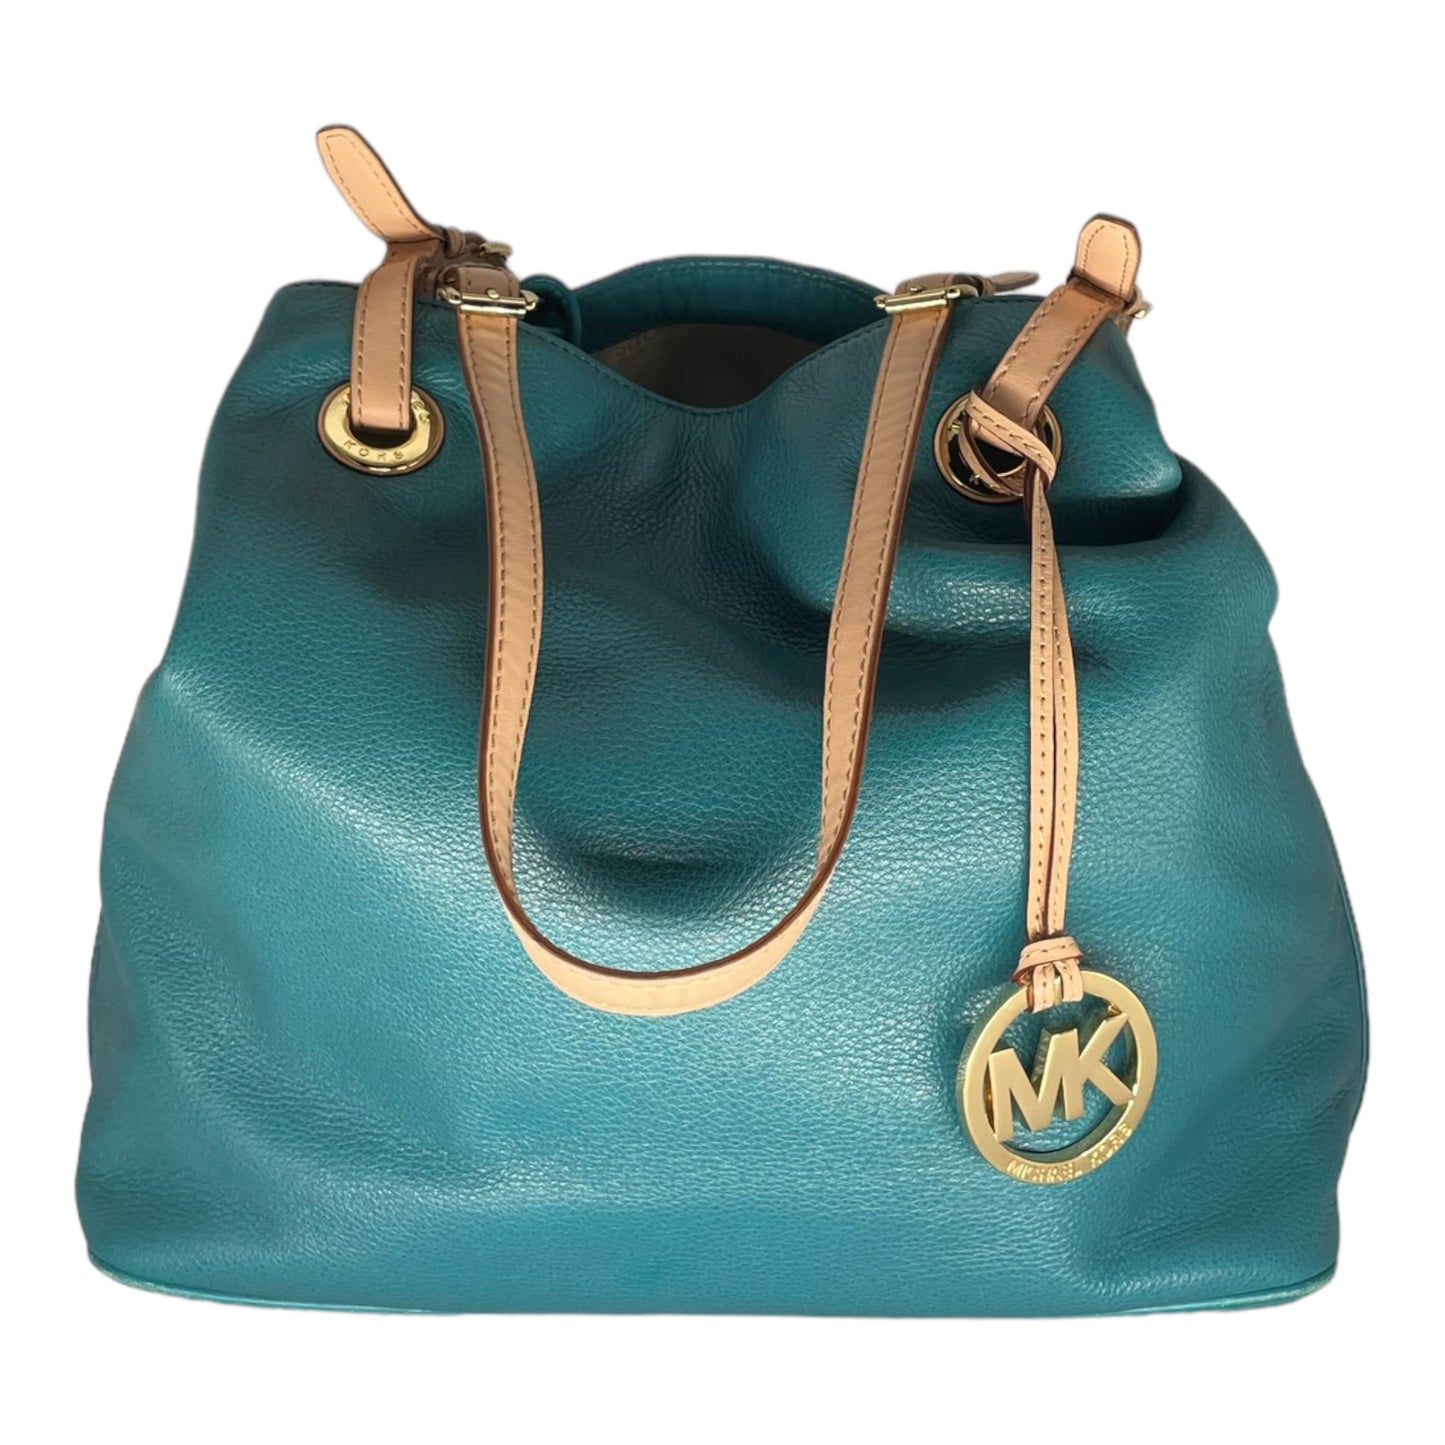 Michael Kors Large Pebbled Leather Teal Green Tote